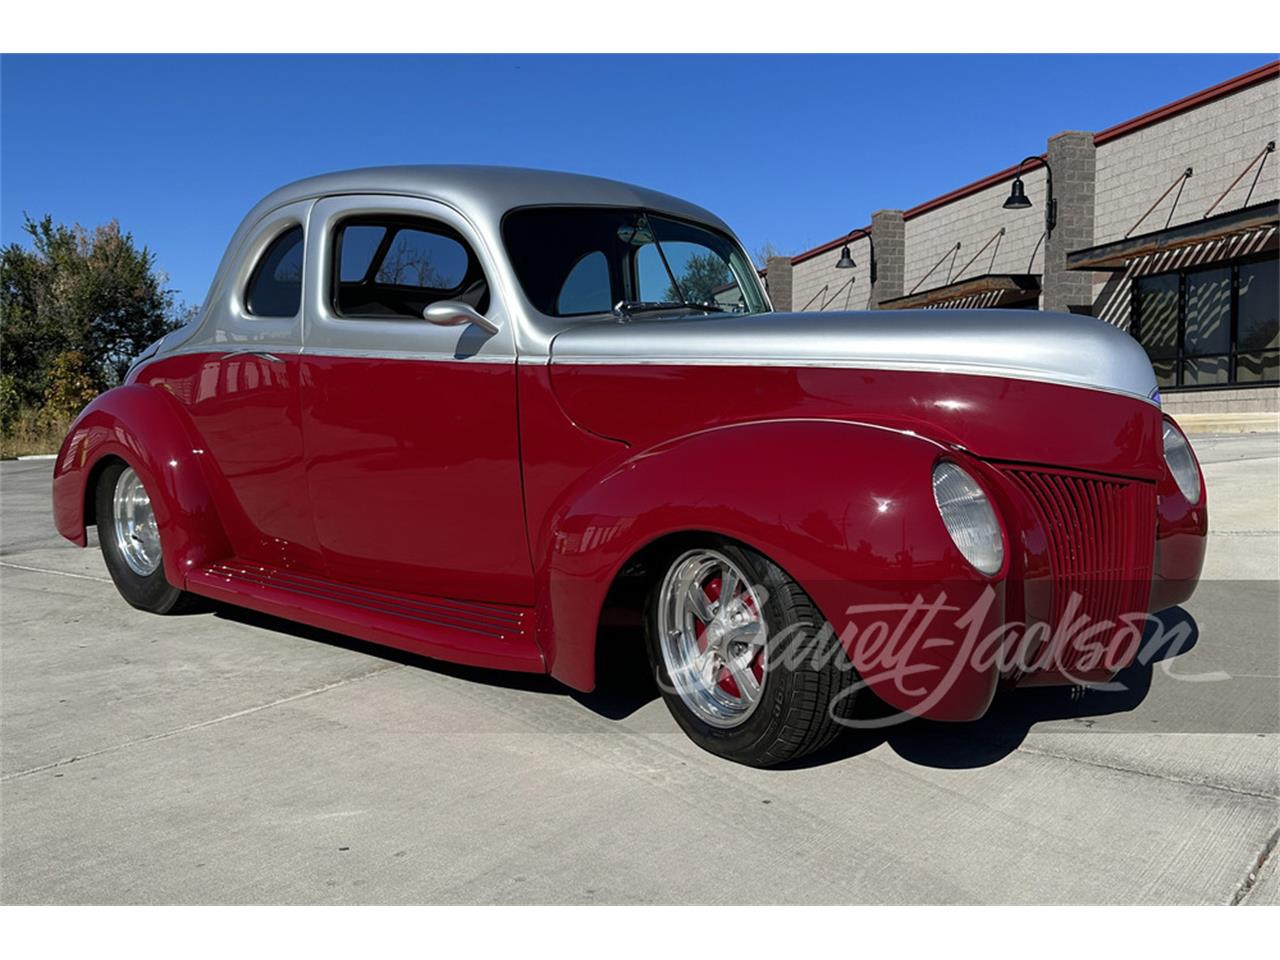 For Sale at Auction: 1940 Ford Custom in Scottsdale, Arizona for sale in Scottsdale, AZ